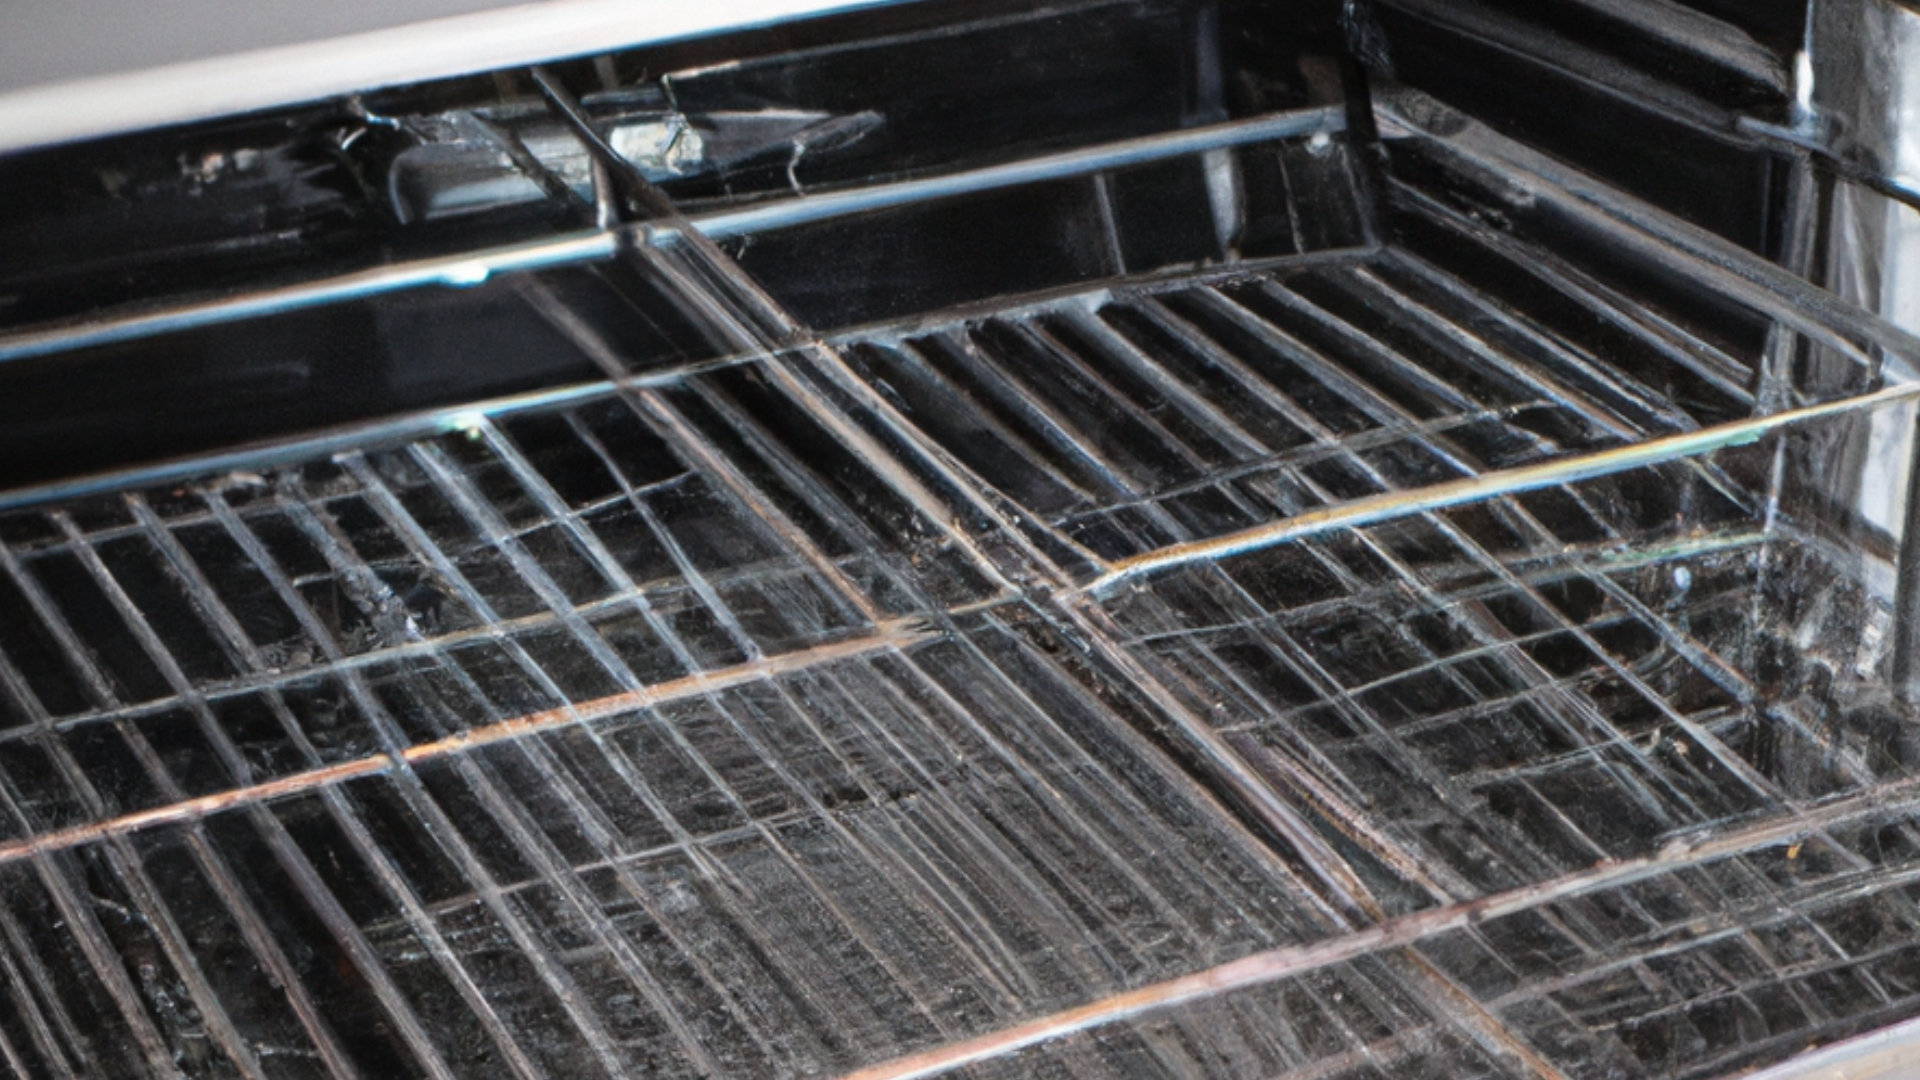 Featured image for “How to Replace and Clean Oven Racks ”